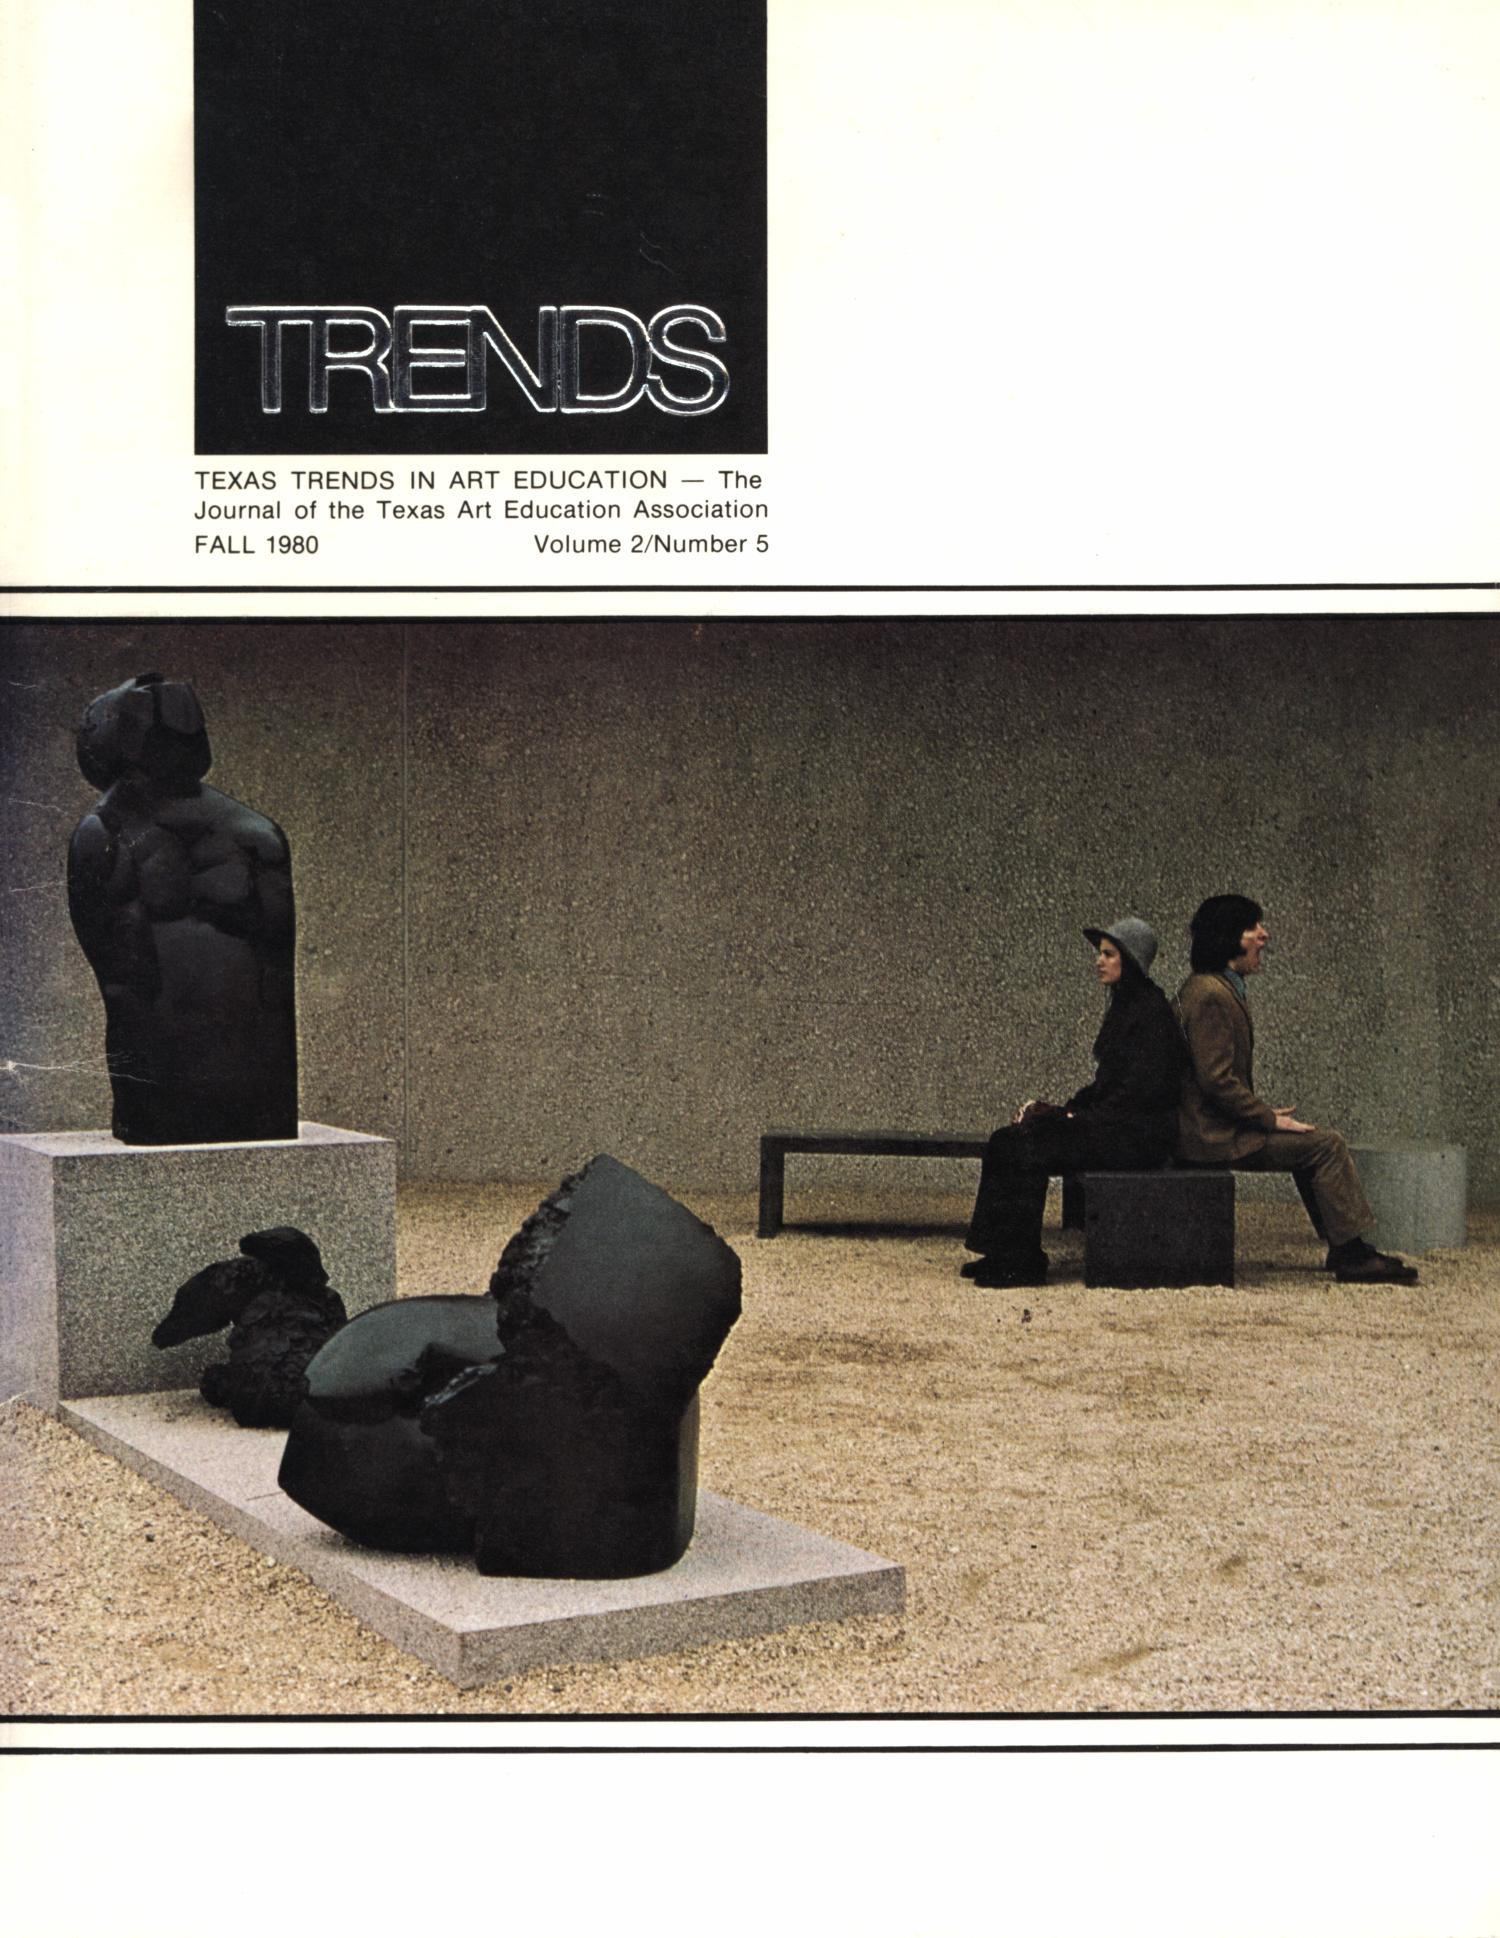 Texas Trends in Art Education, Volume 2, Number 5, Fall 1980
                                                
                                                    Front Cover
                                                